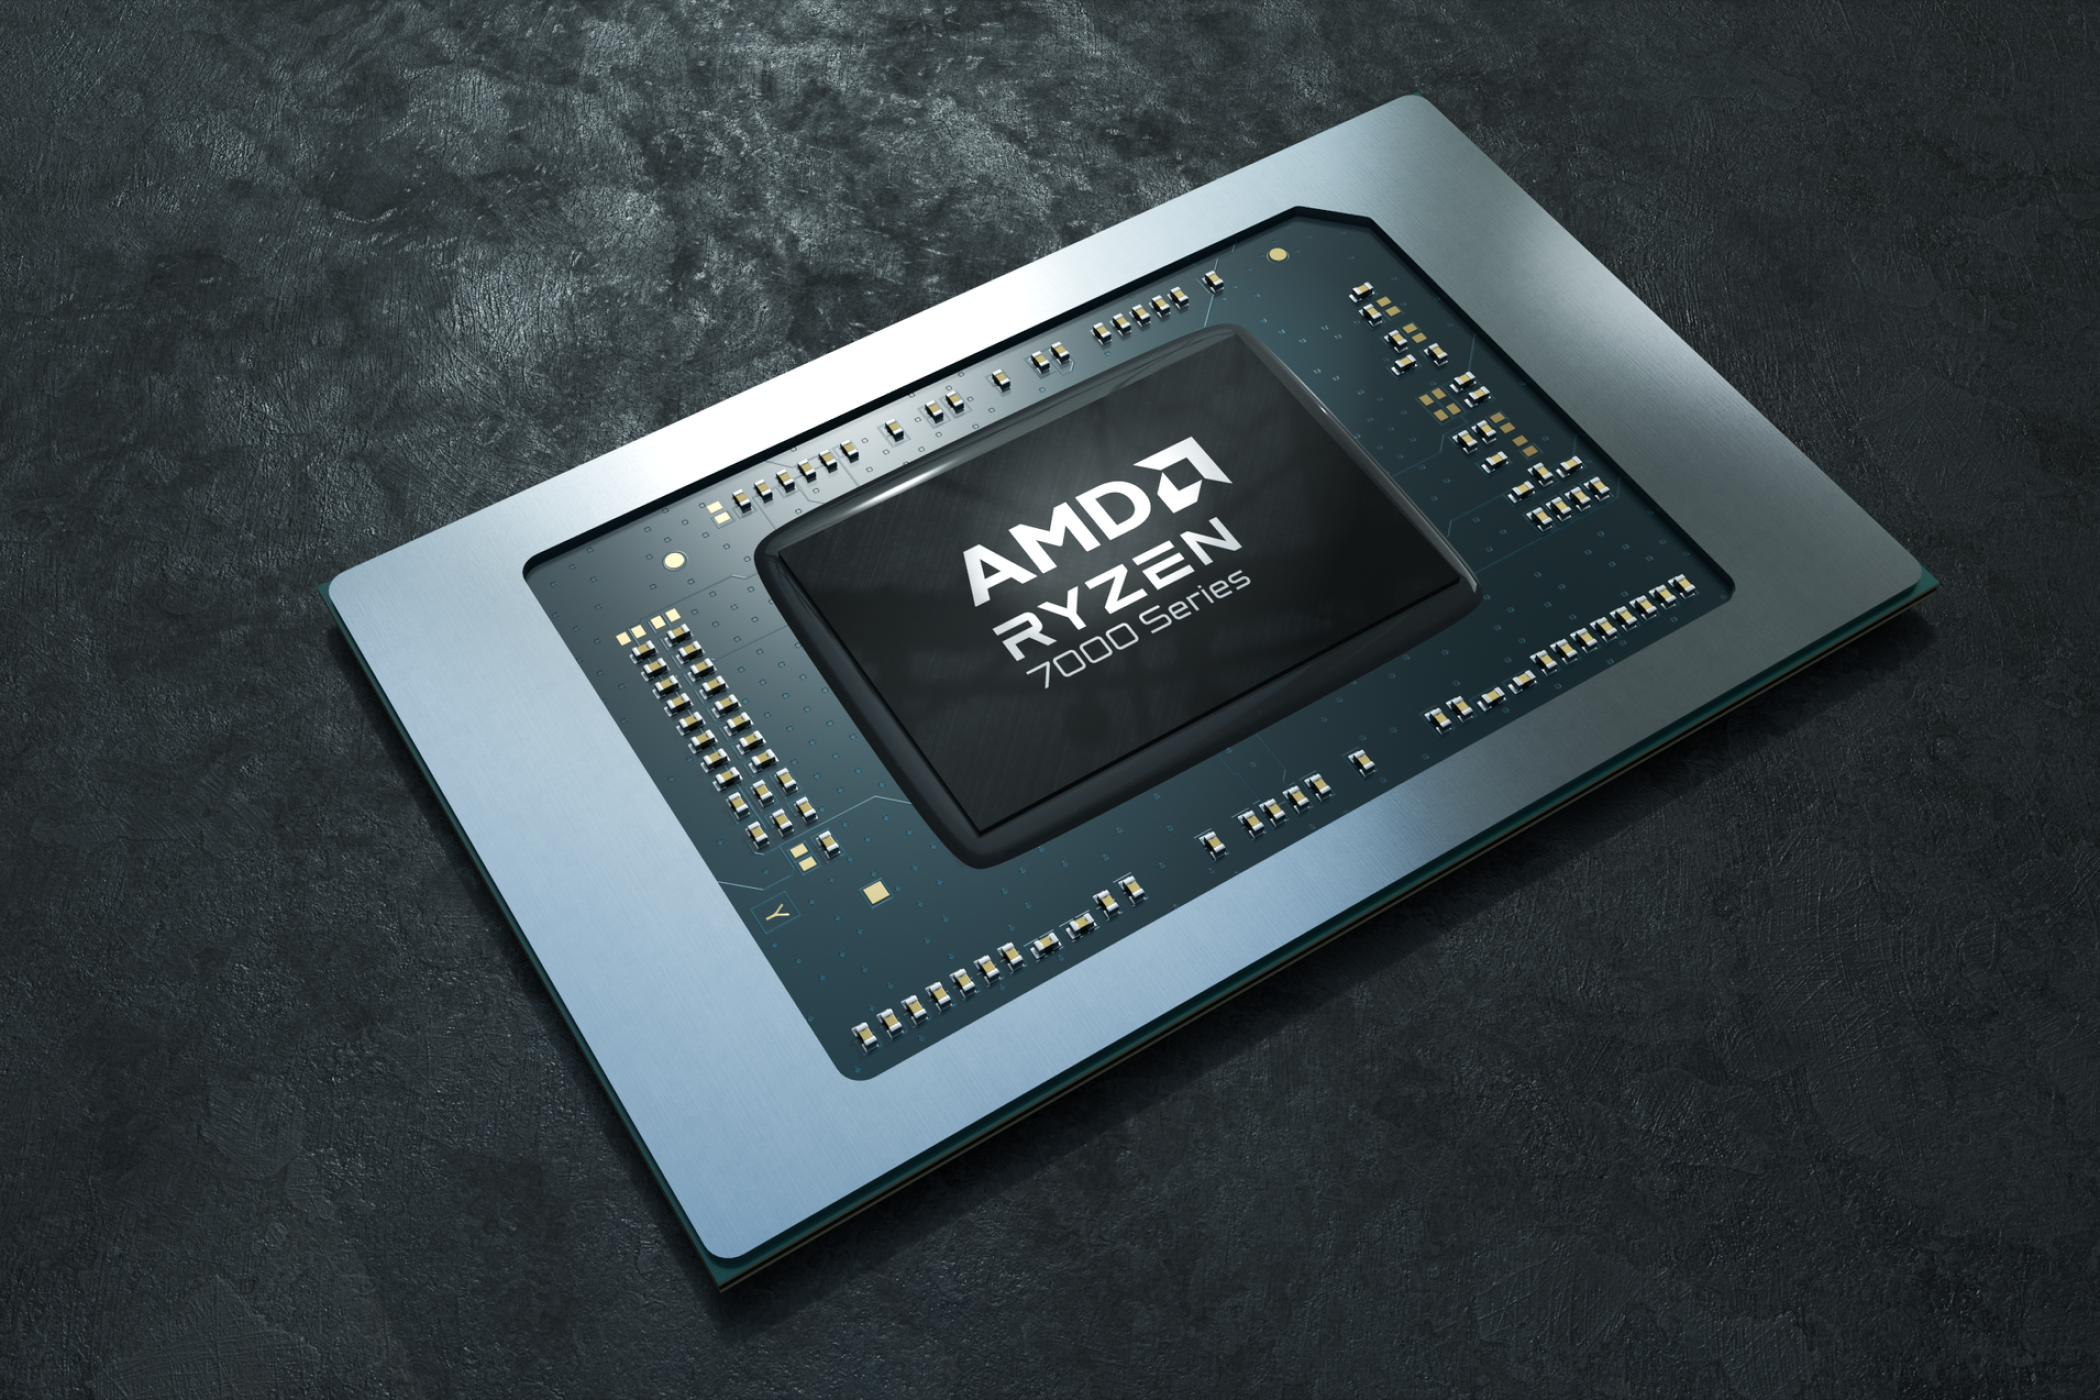 amd-reveals-key-details-about-its-upcoming-hybrid-apus